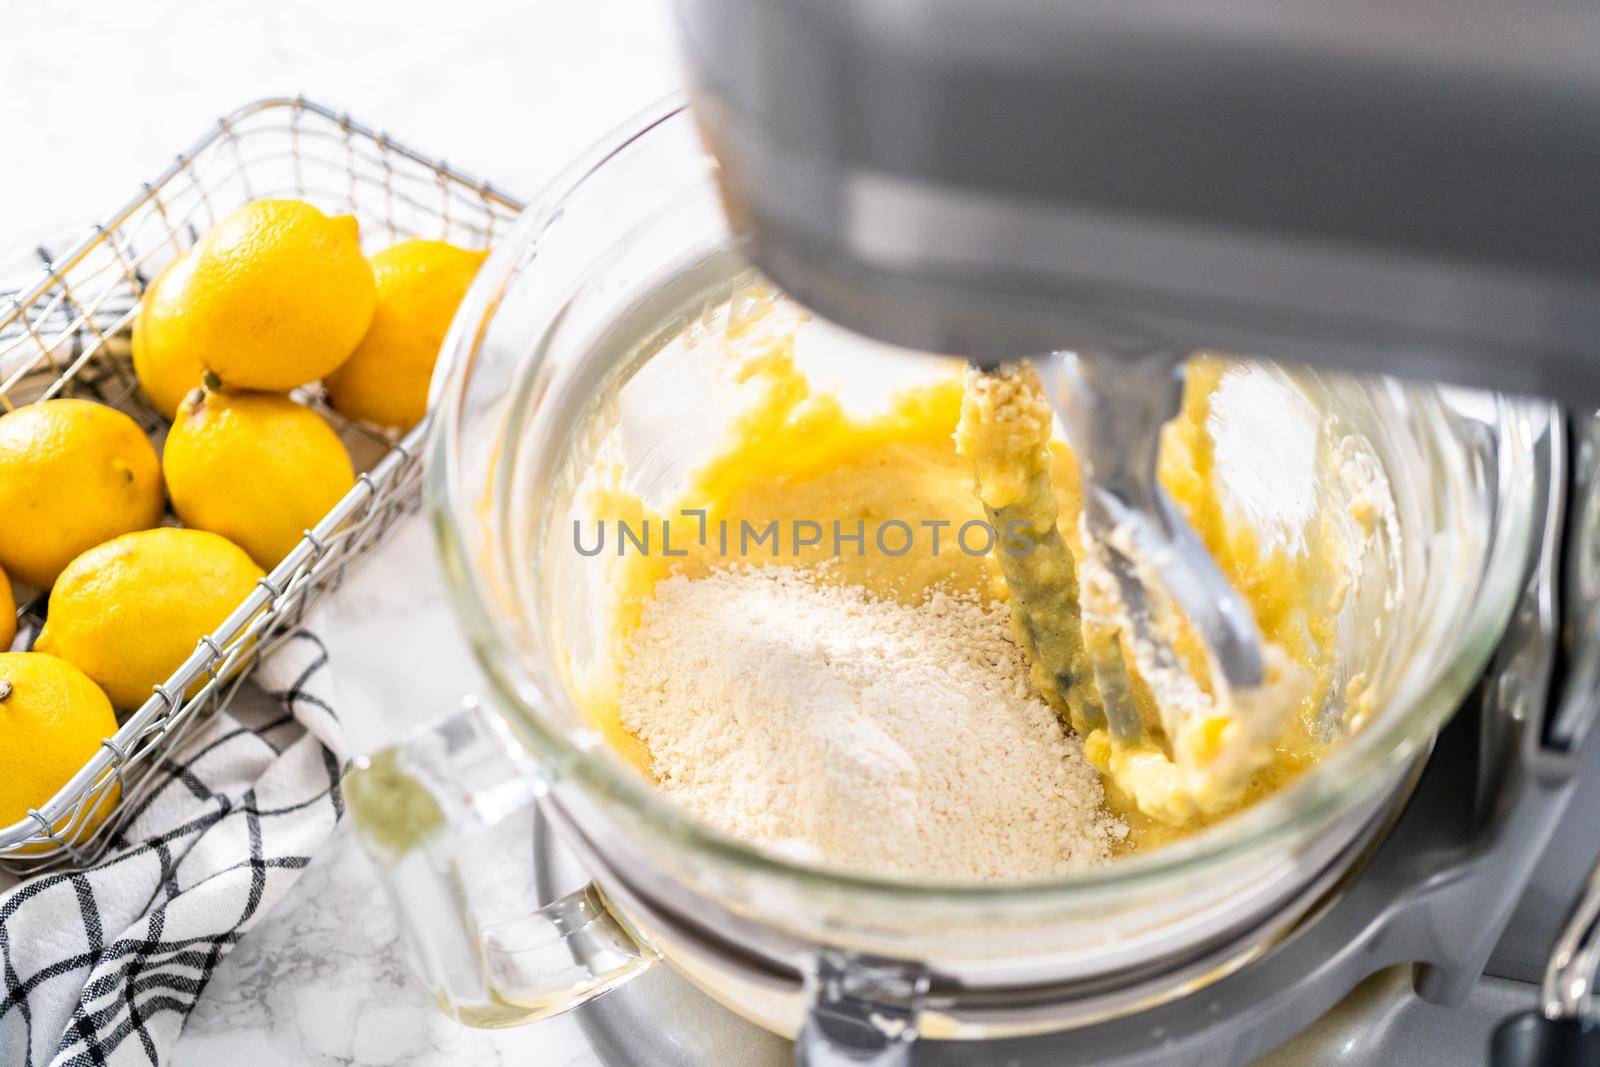 Mixing ingredients into the batter for lemon pound cake.